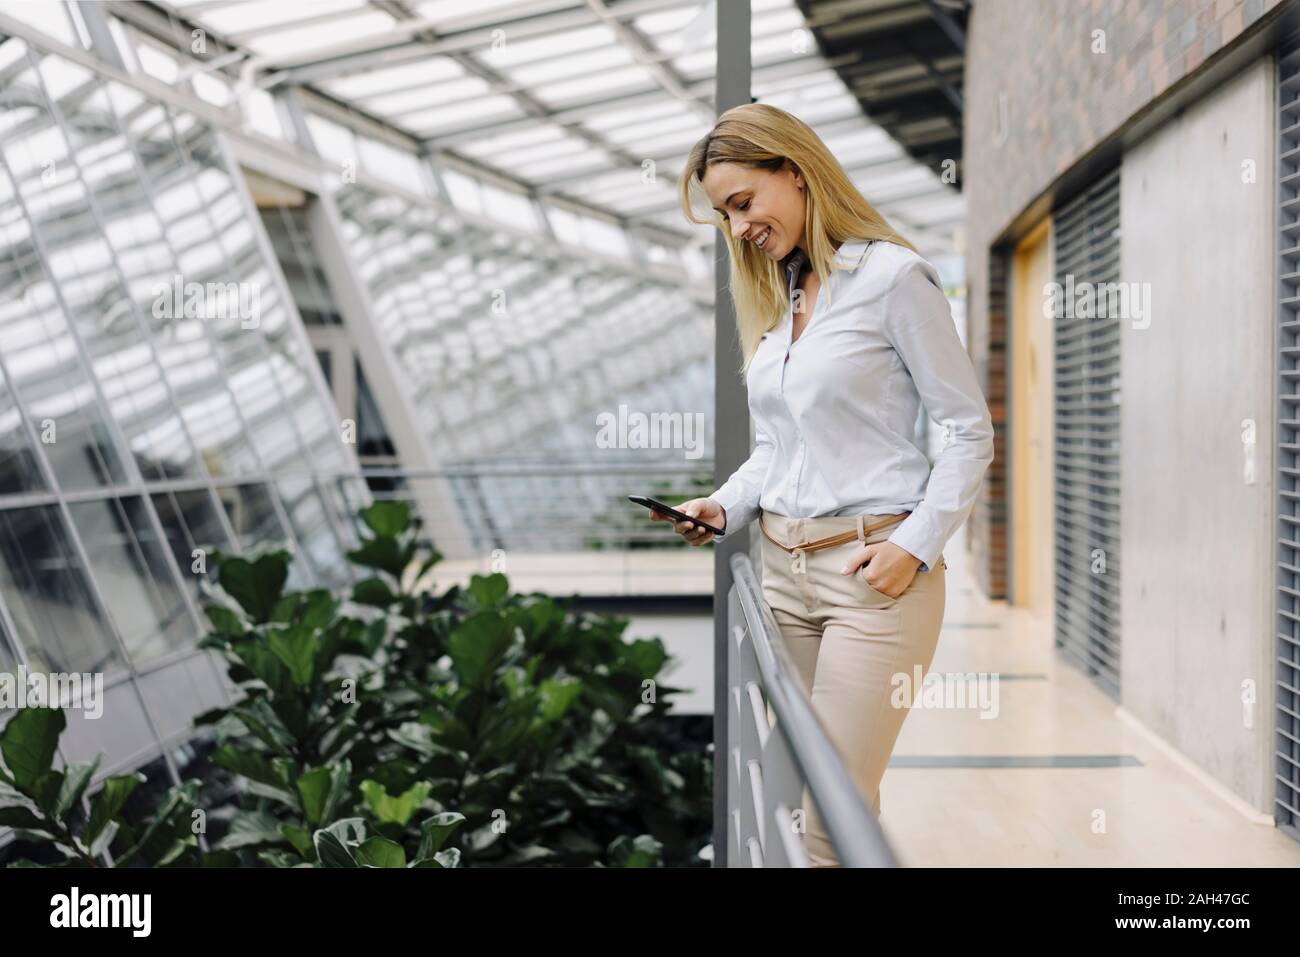 Smiling young businesswoman using cell phone in a modern office building Banque D'Images